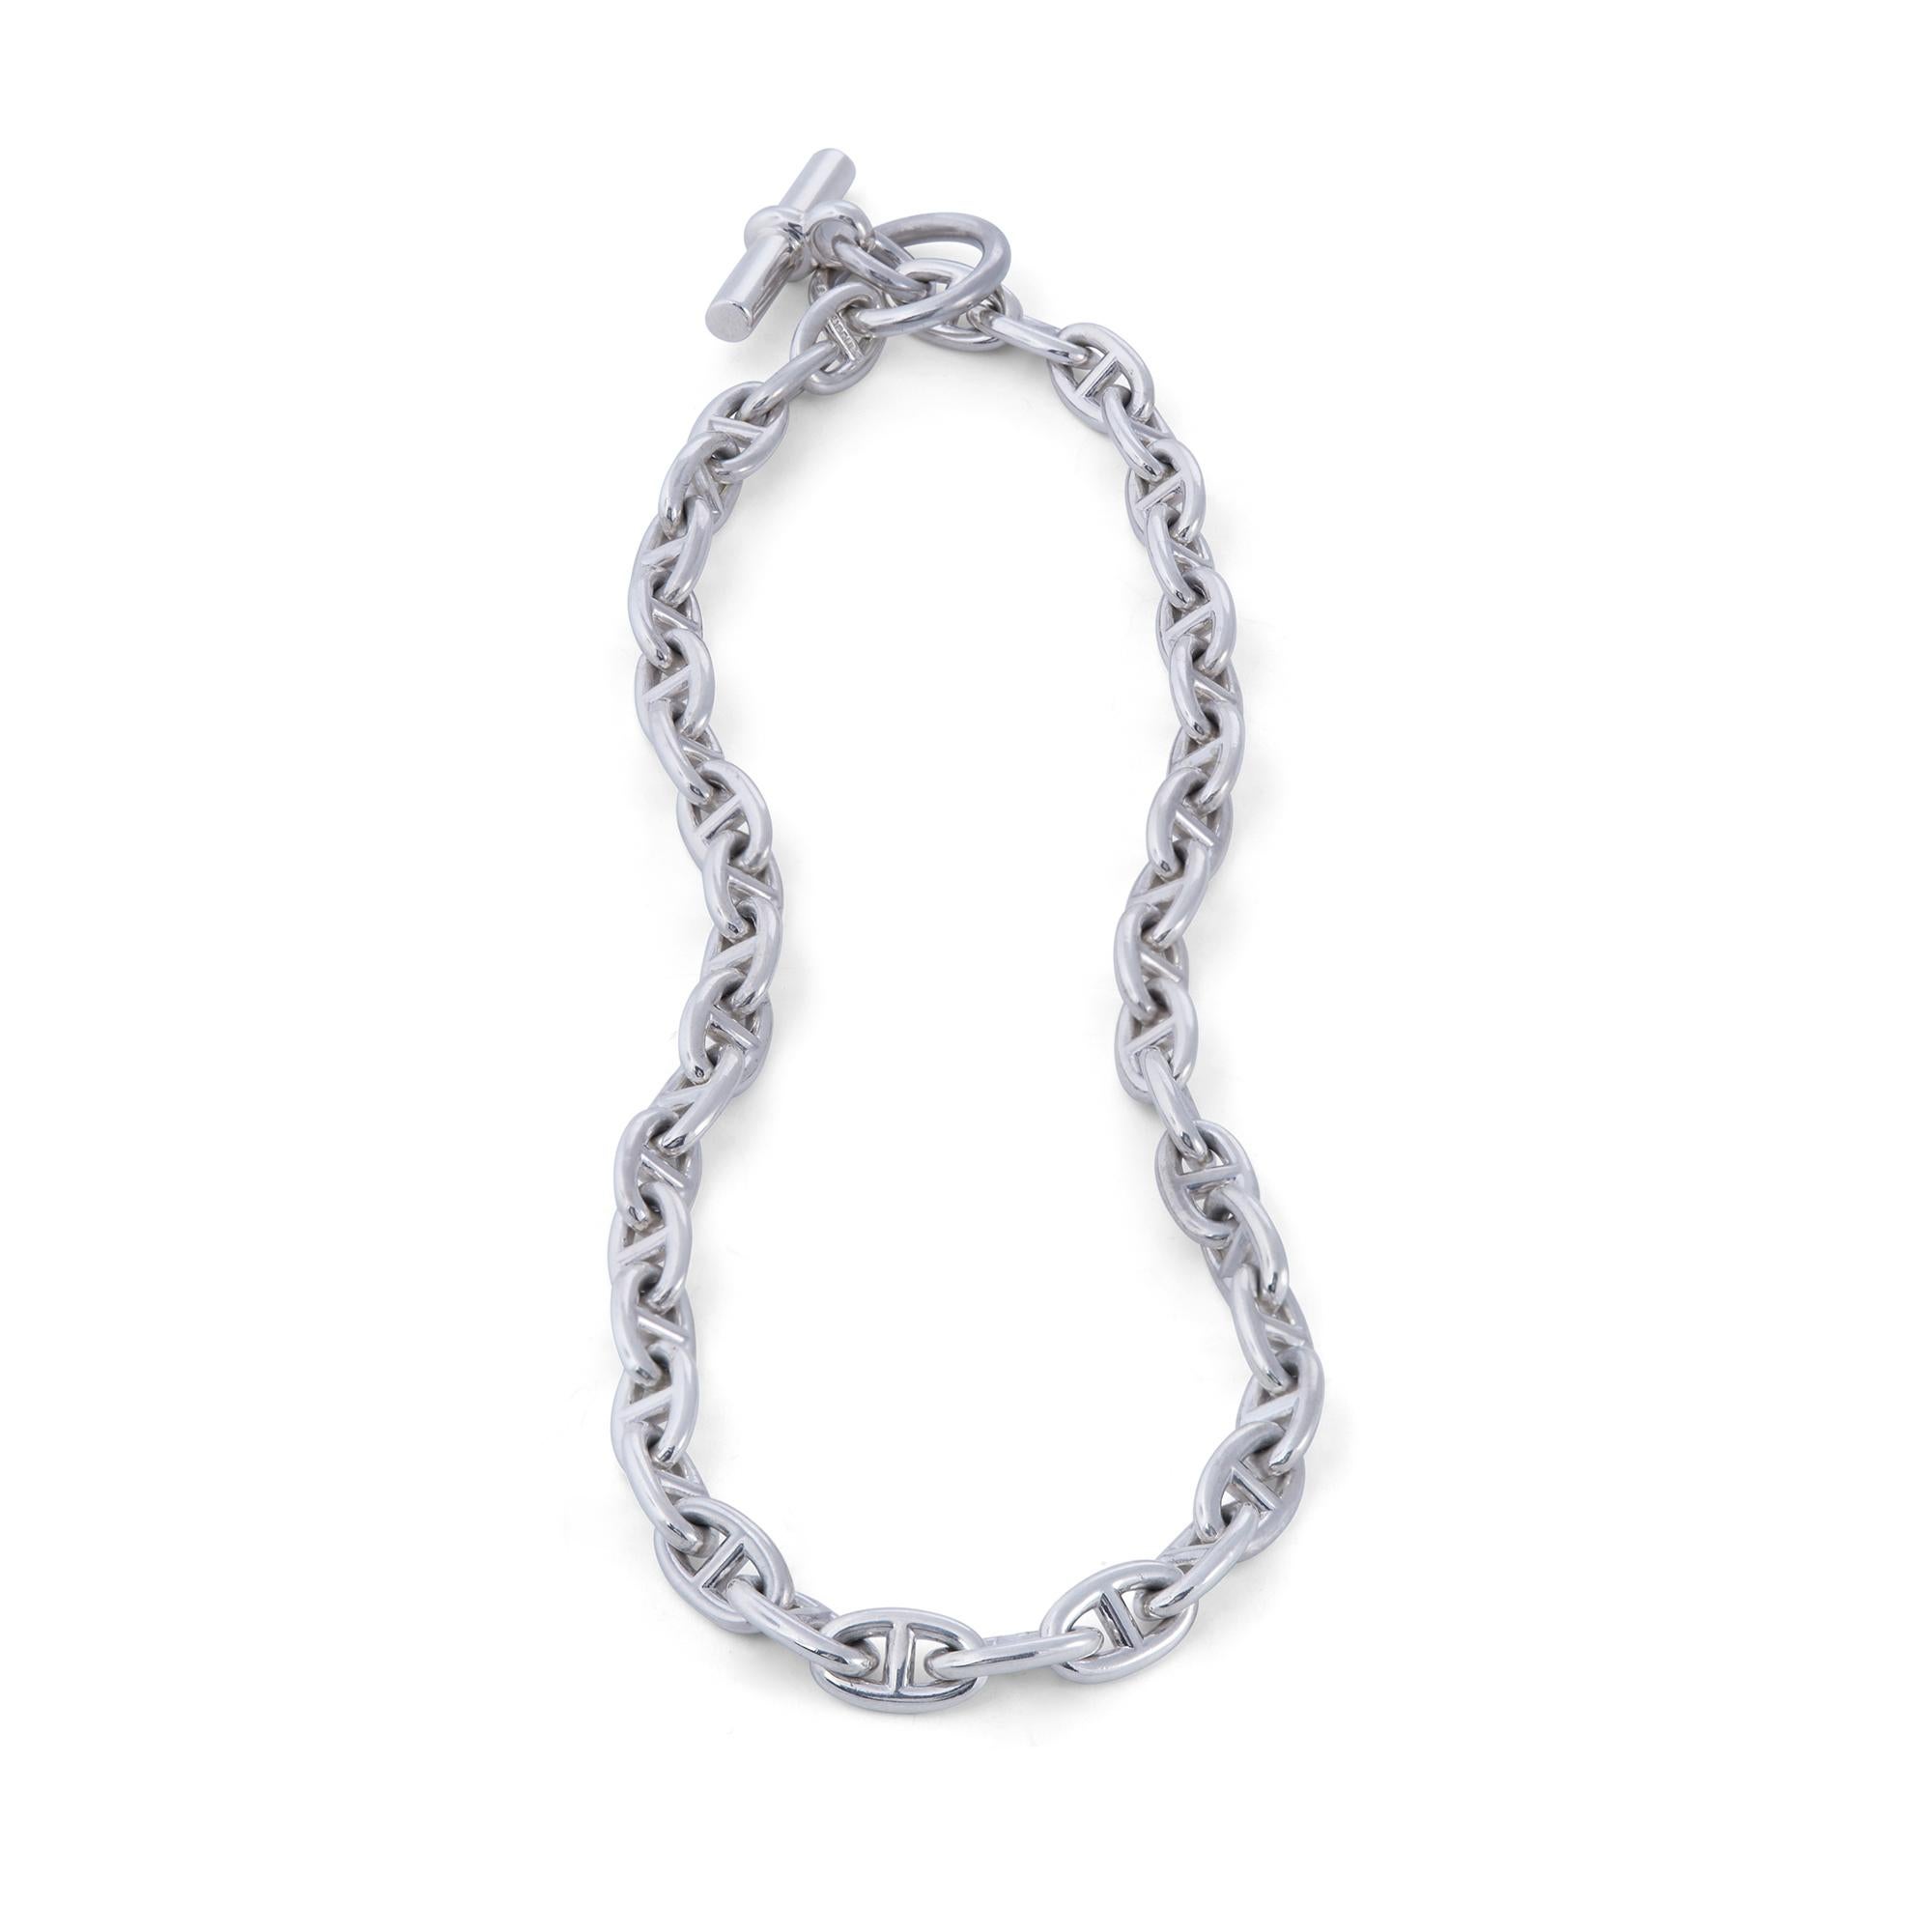 Authentic Hermès Chaîne d'ancre necklace crafted in sterling silver. The iconic ship anchor links are completed by a toggle clasp. The links measure .56 inches x .34 inches and the necklace measures 17 inches in length. Signed Hermès with hallmarks.